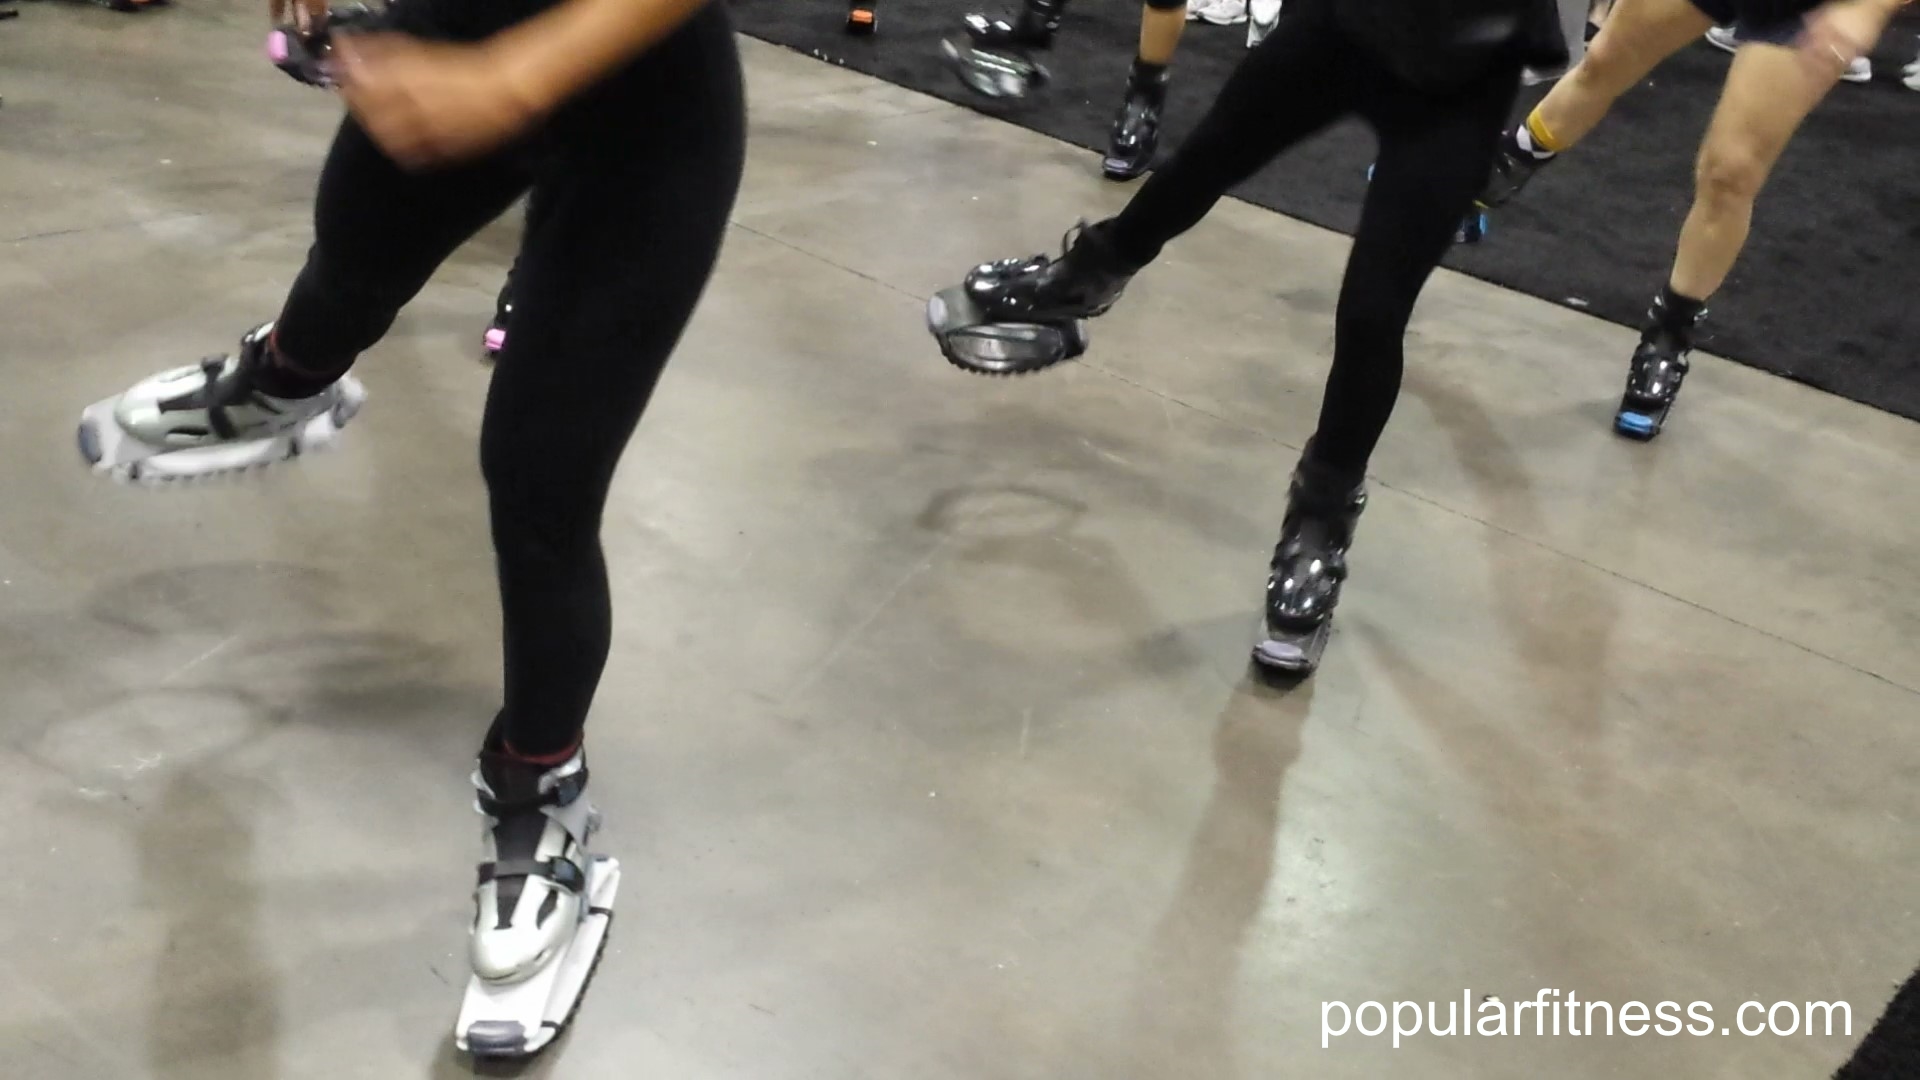 exercise class wearing kangaroo jump shoes - photo by popular fitness